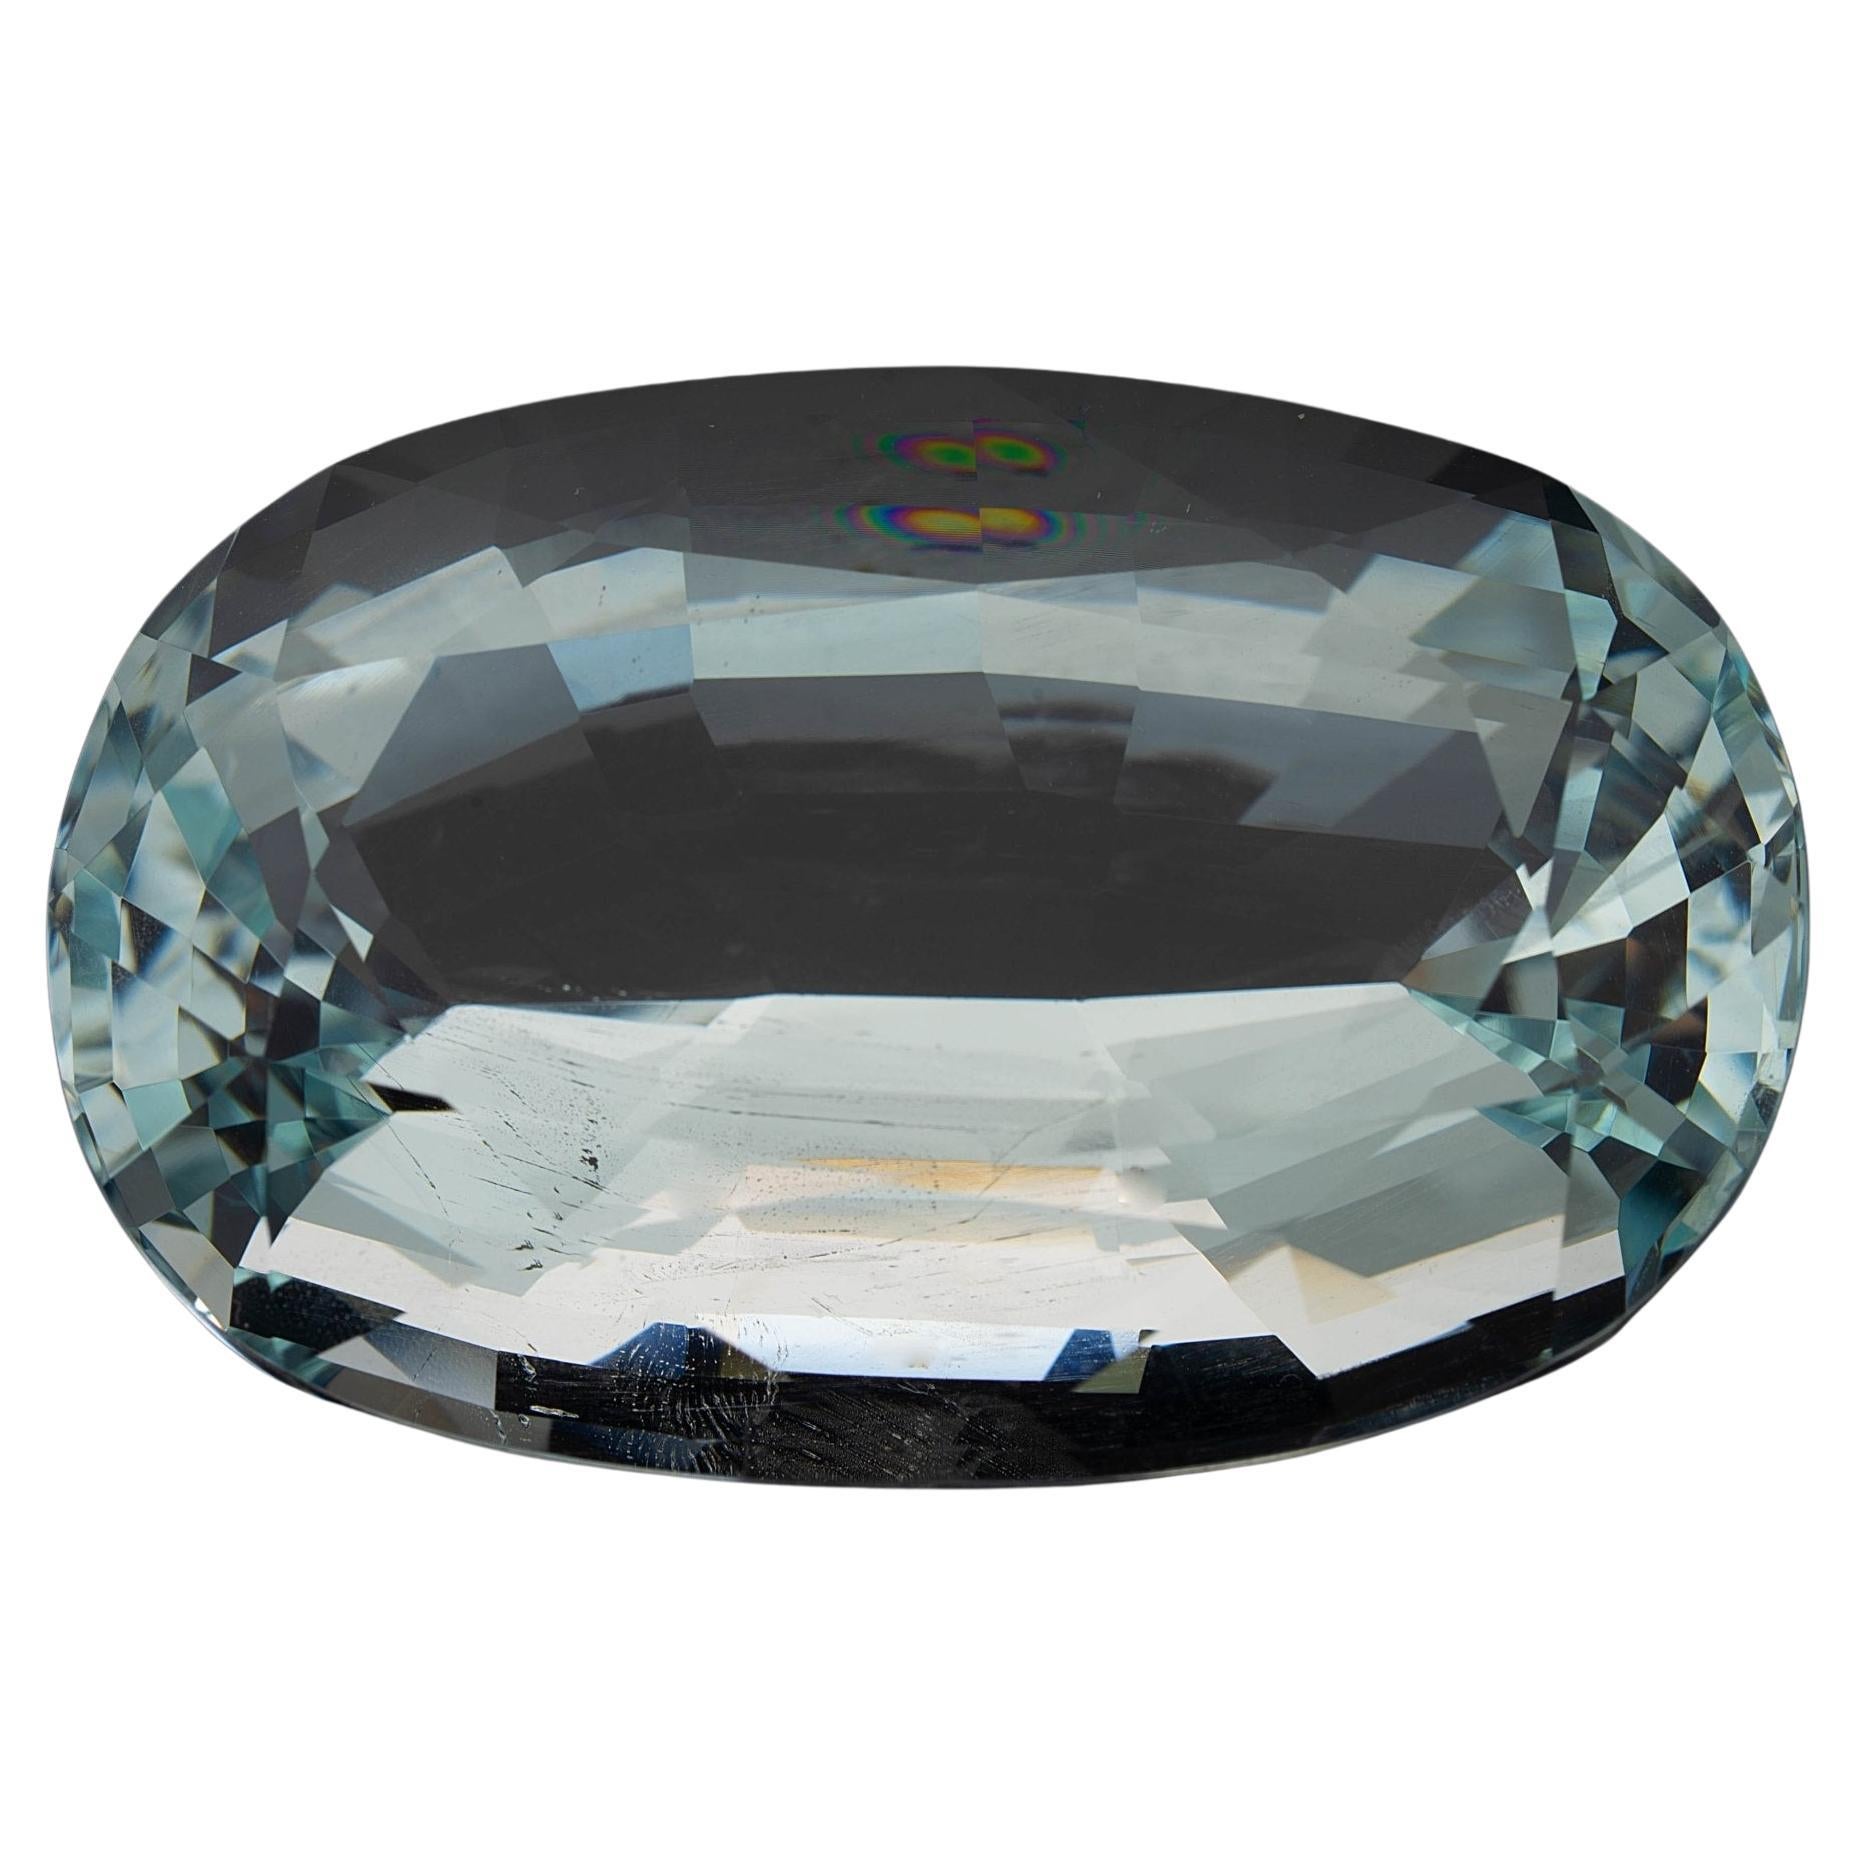 113.03 Carat Oval Cut Aquamarine From Brazil For Sale